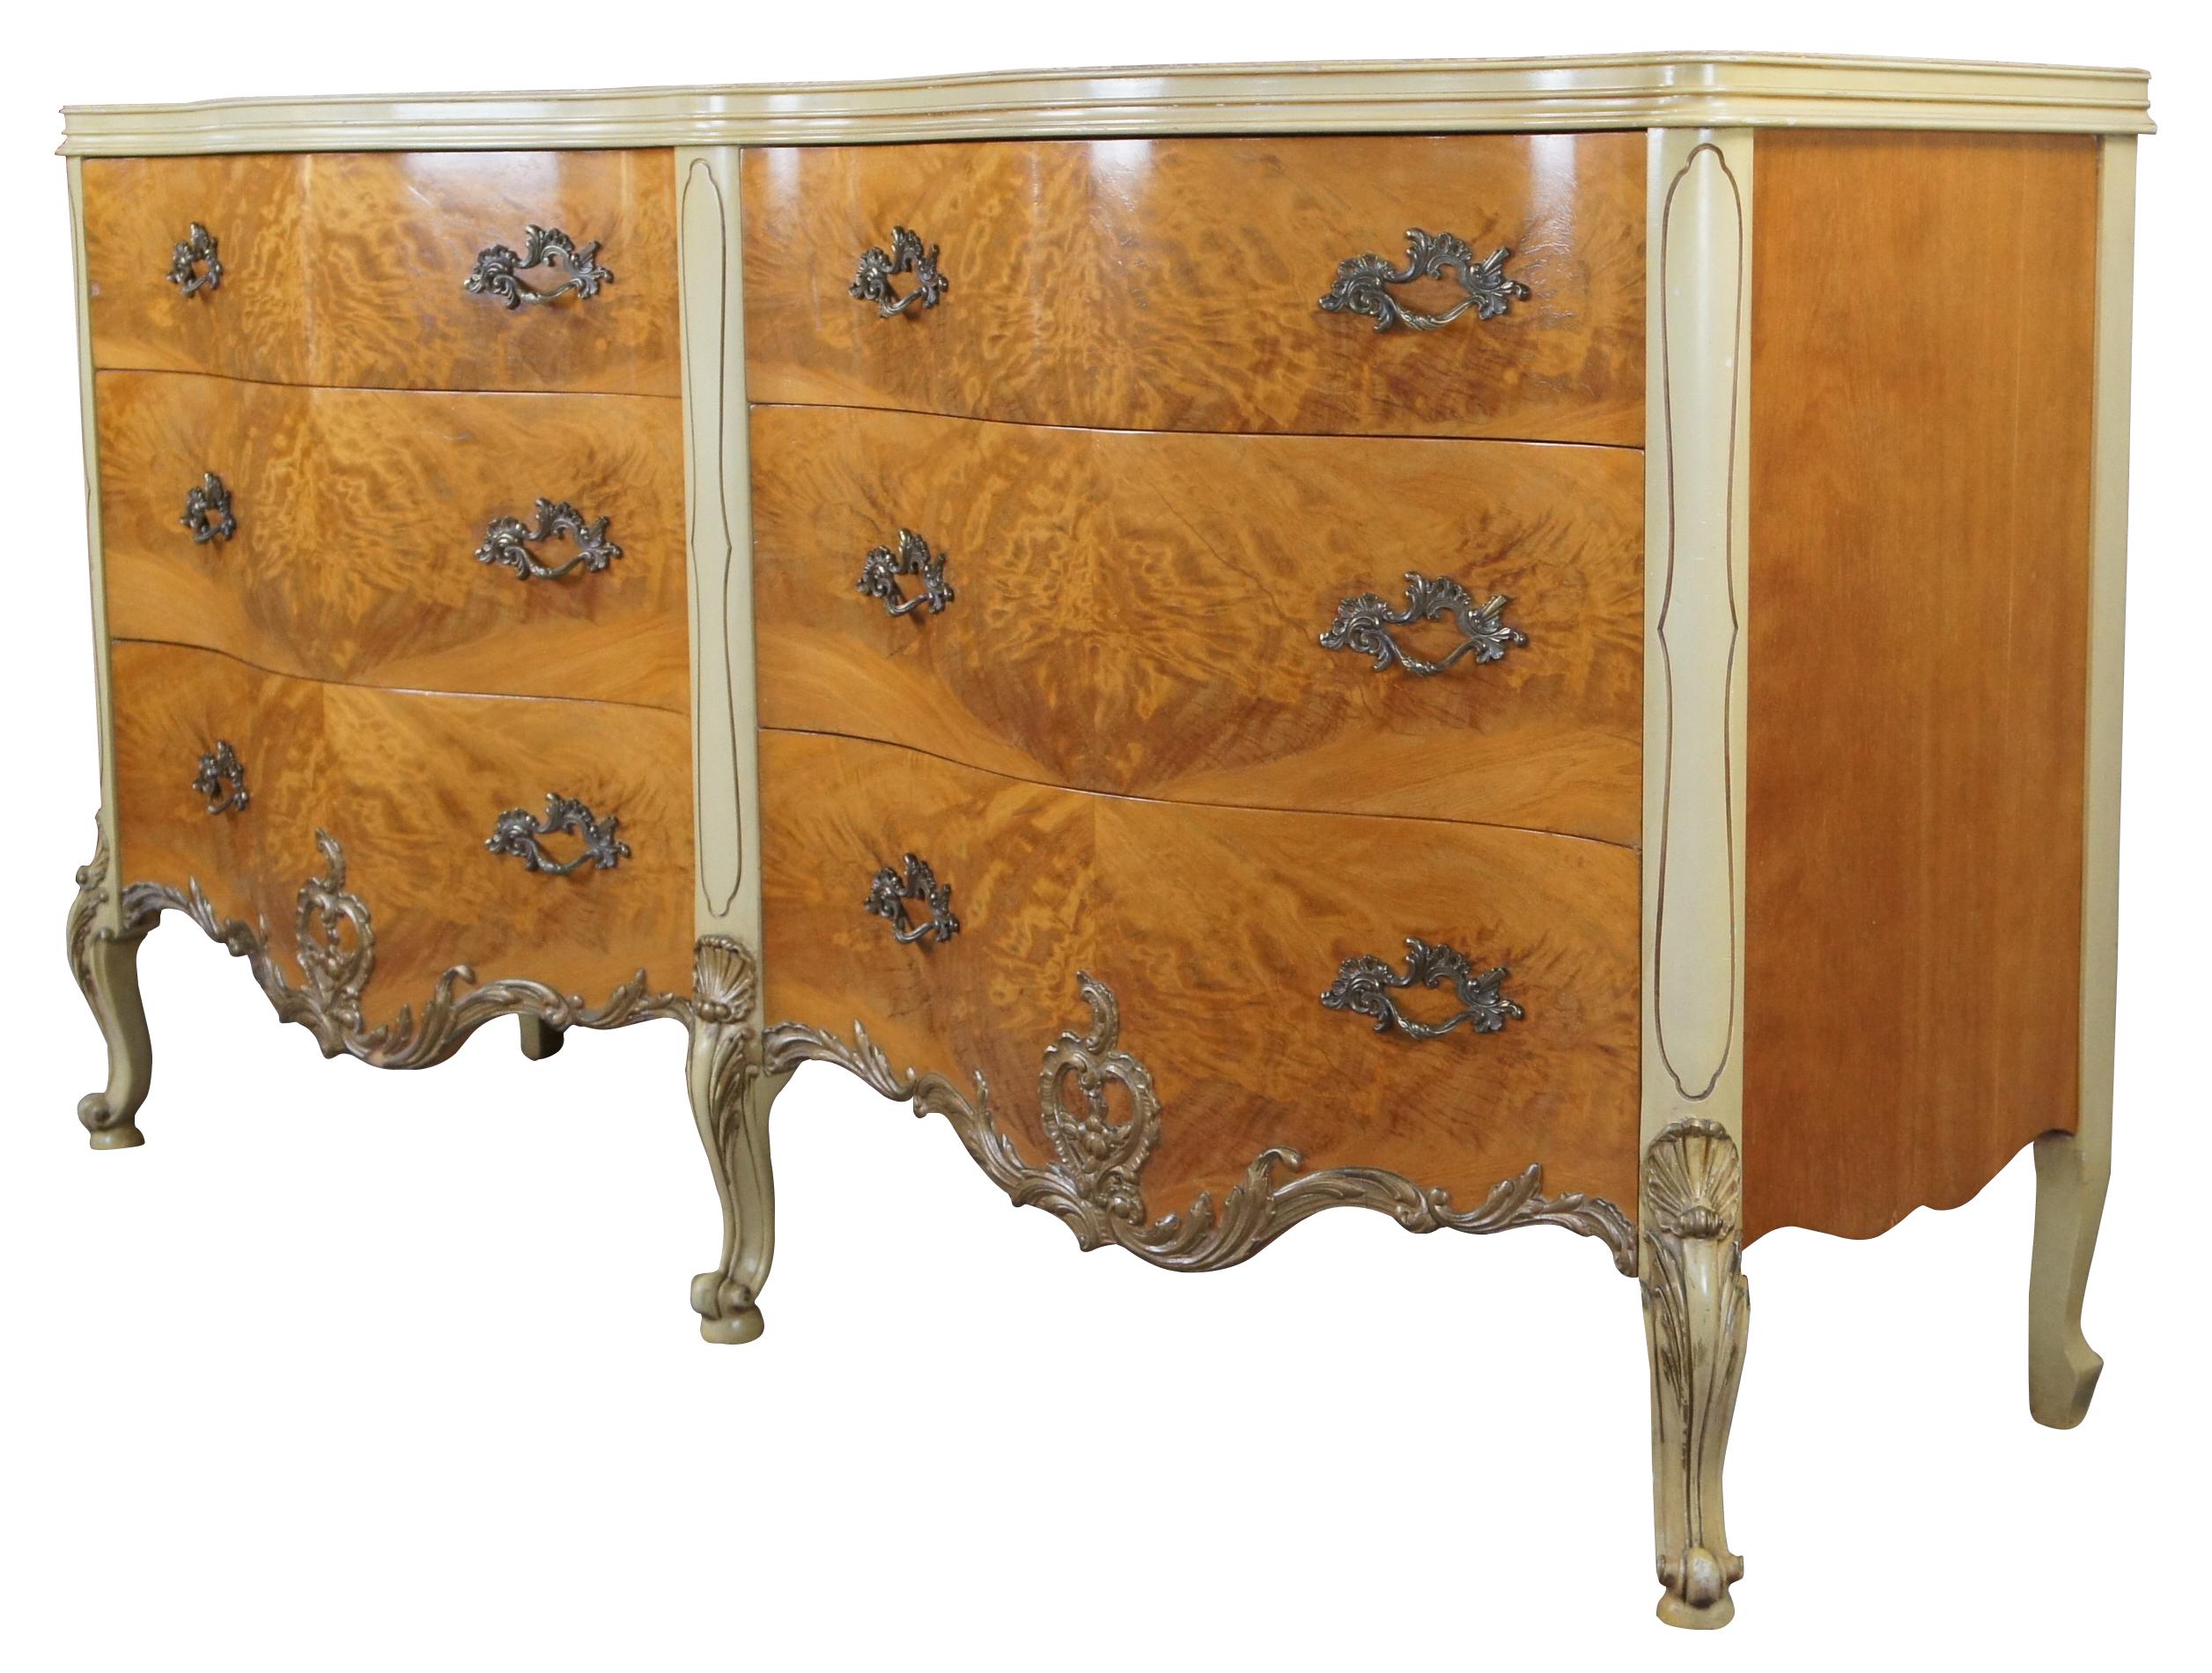 Impressive French inspired double dresser or credenza by Romweber Furniture, circa 1950s. Features a serpentine or oxbow form with six dovetailed drawers and brass hardware. Drawers and top are made from an exotic African burled avodire wood. The